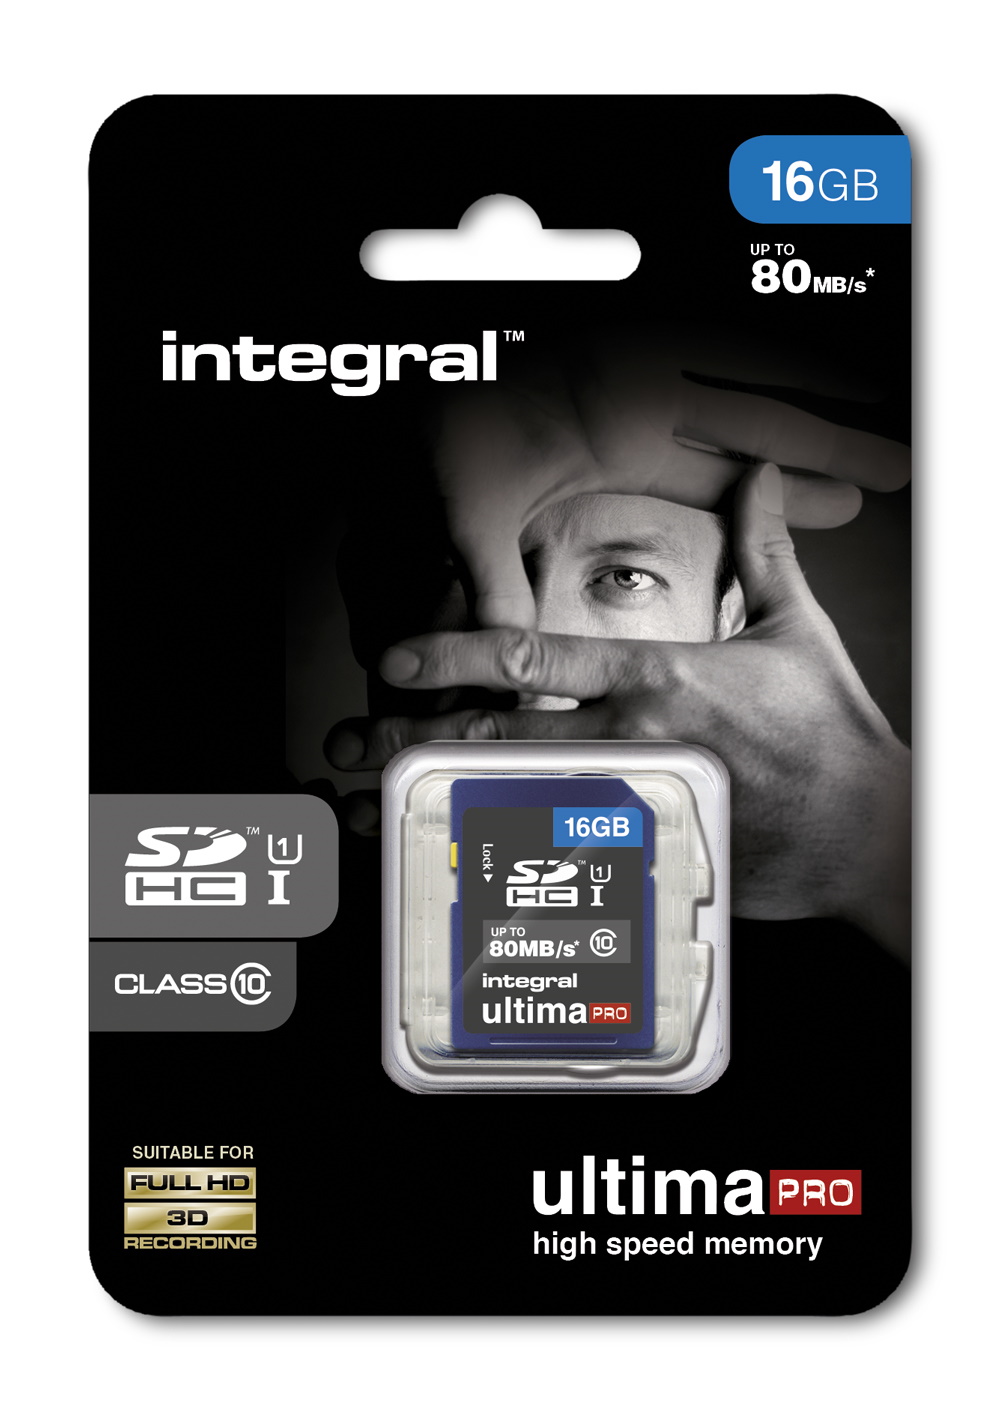 footsteps pageant Embassy 16GB Integral Ultima Pro SDHC 80MB/sec CL10 UHS-1 Memory Card